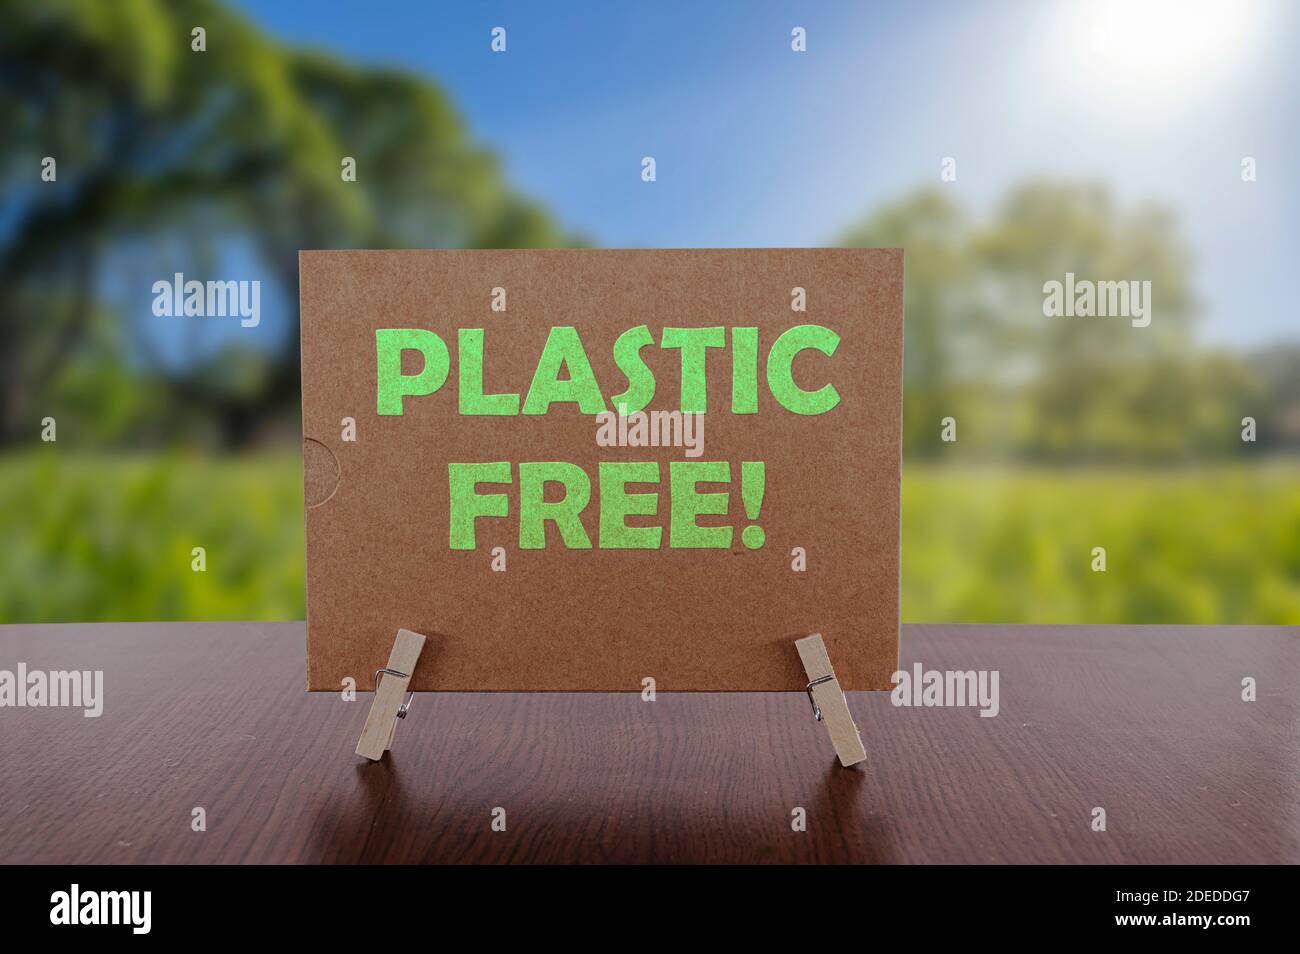 Plastic free text on card on the table with sunny green park background. Ecology concept, recycle, reuse, reduce waste. Stock Photo